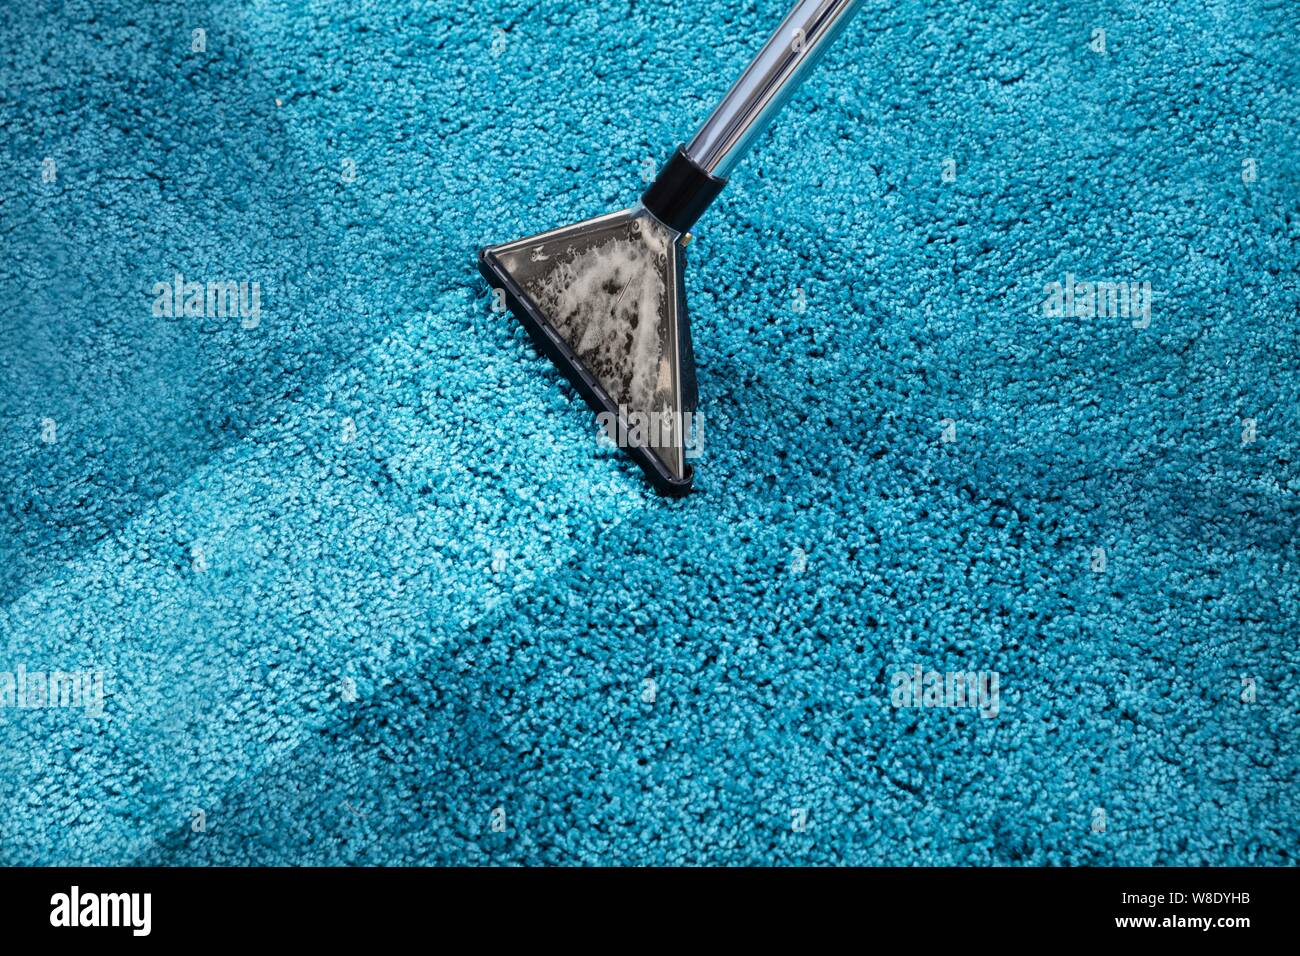 Close-up Of A Person Cleaning Carpet With Vacuum Cleaner Stock Photo